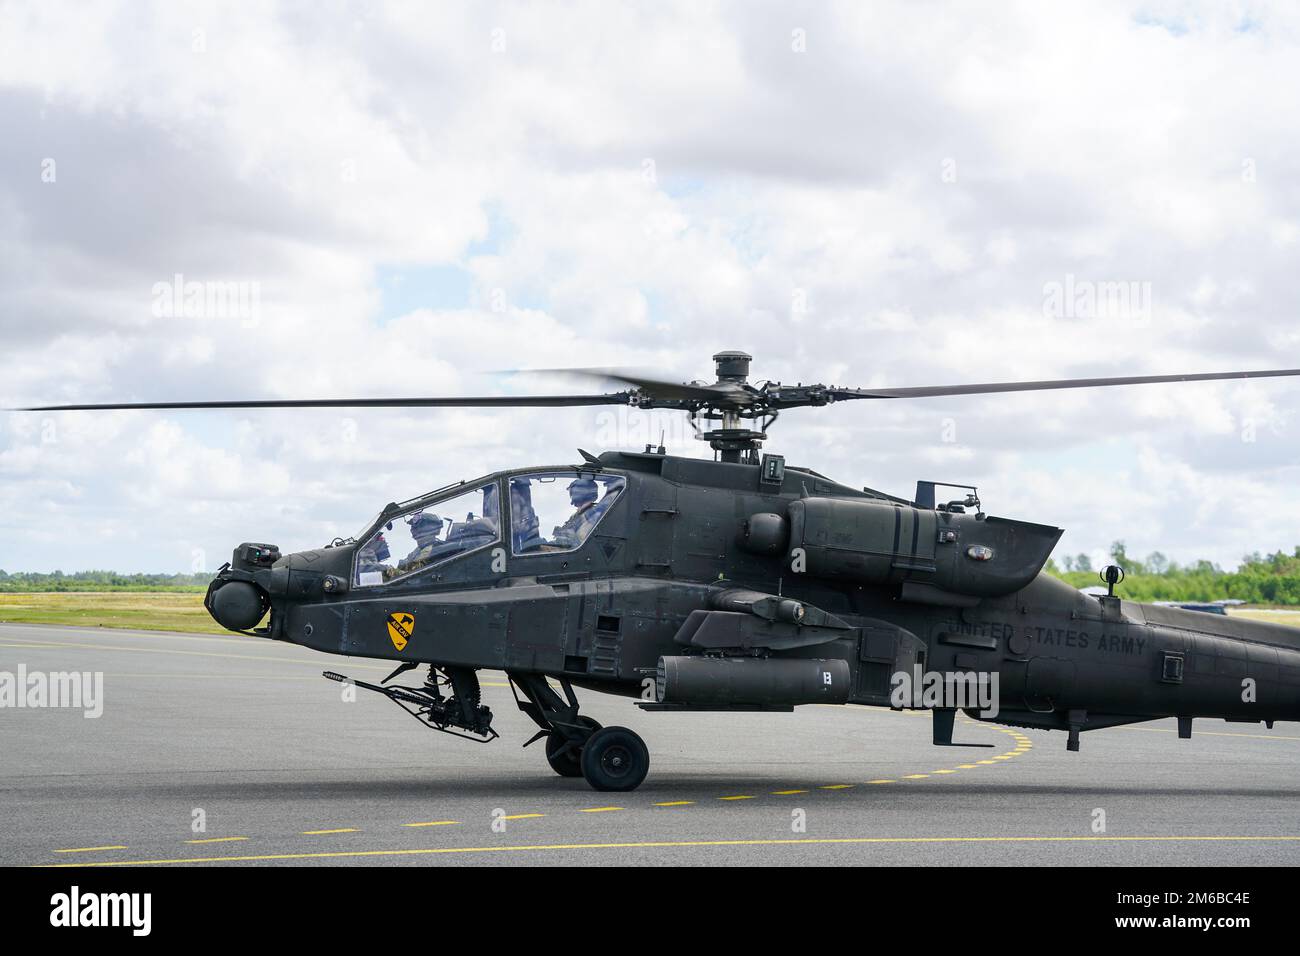 Liepaja, Latvia - August 07, 2022: AH-64D Apache attack helicopter from United States army with crew after landing at the airport runway Stock Photo